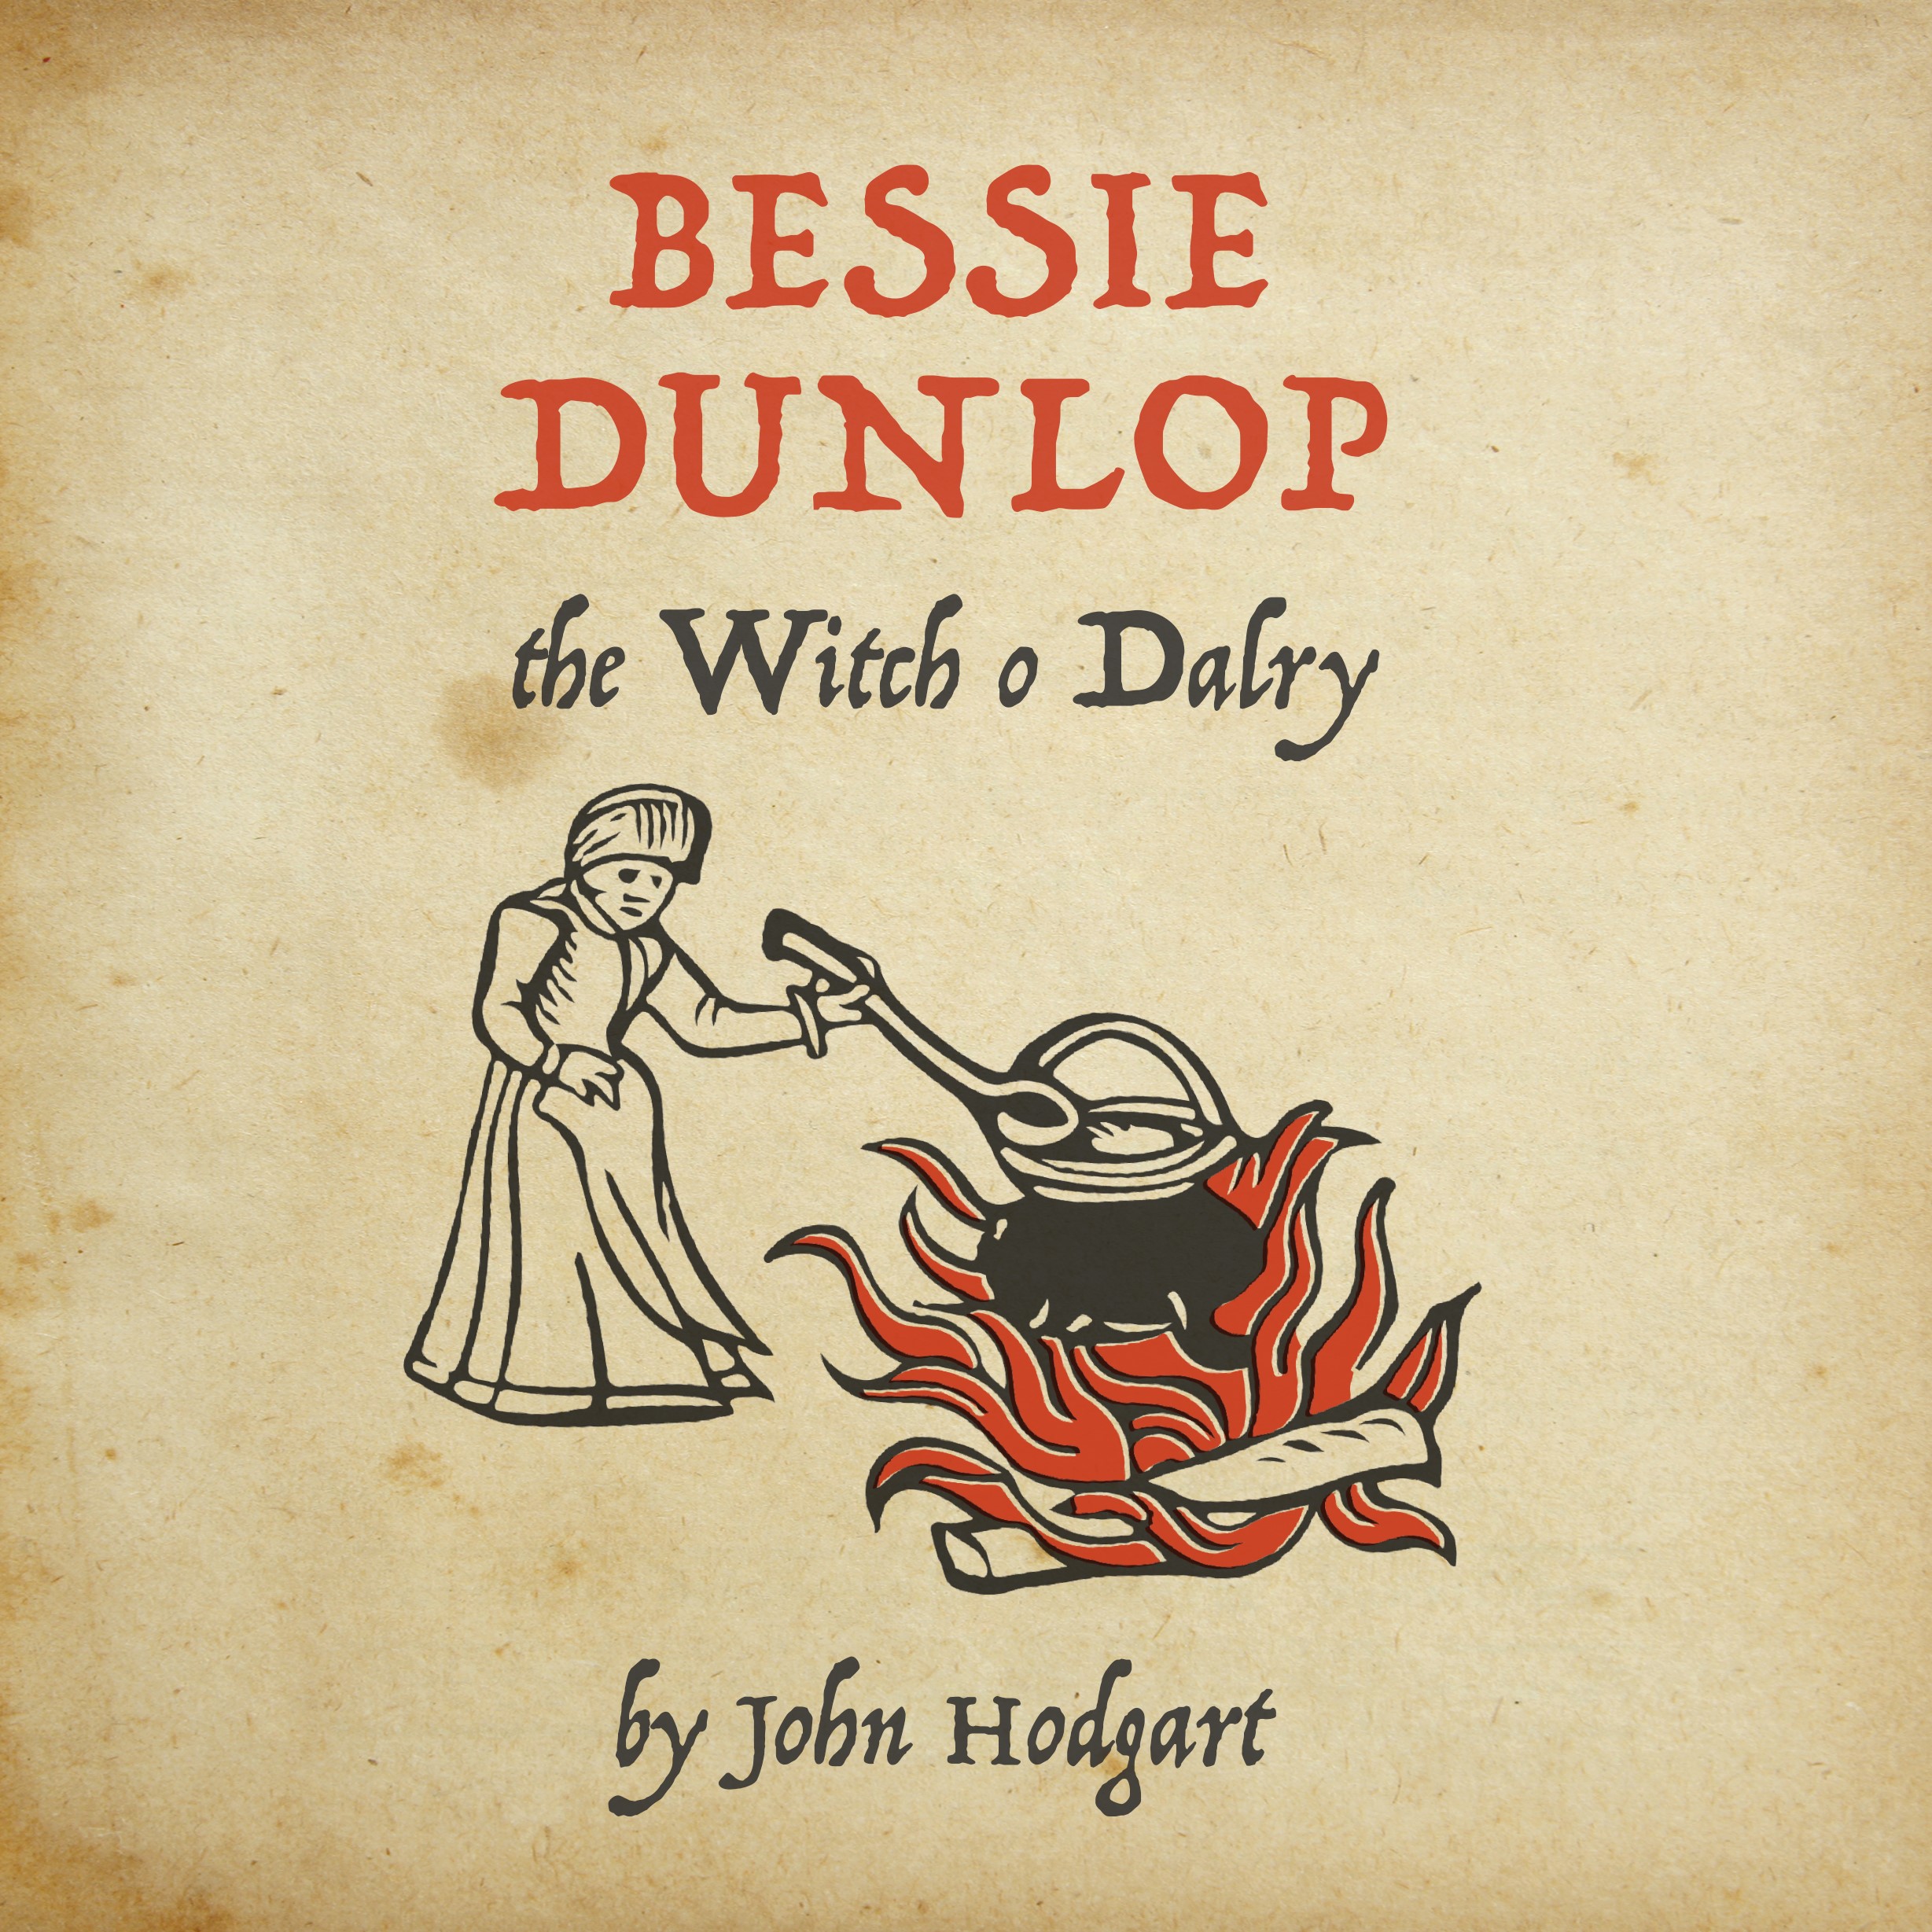 Bessie Dunlop The Witch o Dalry